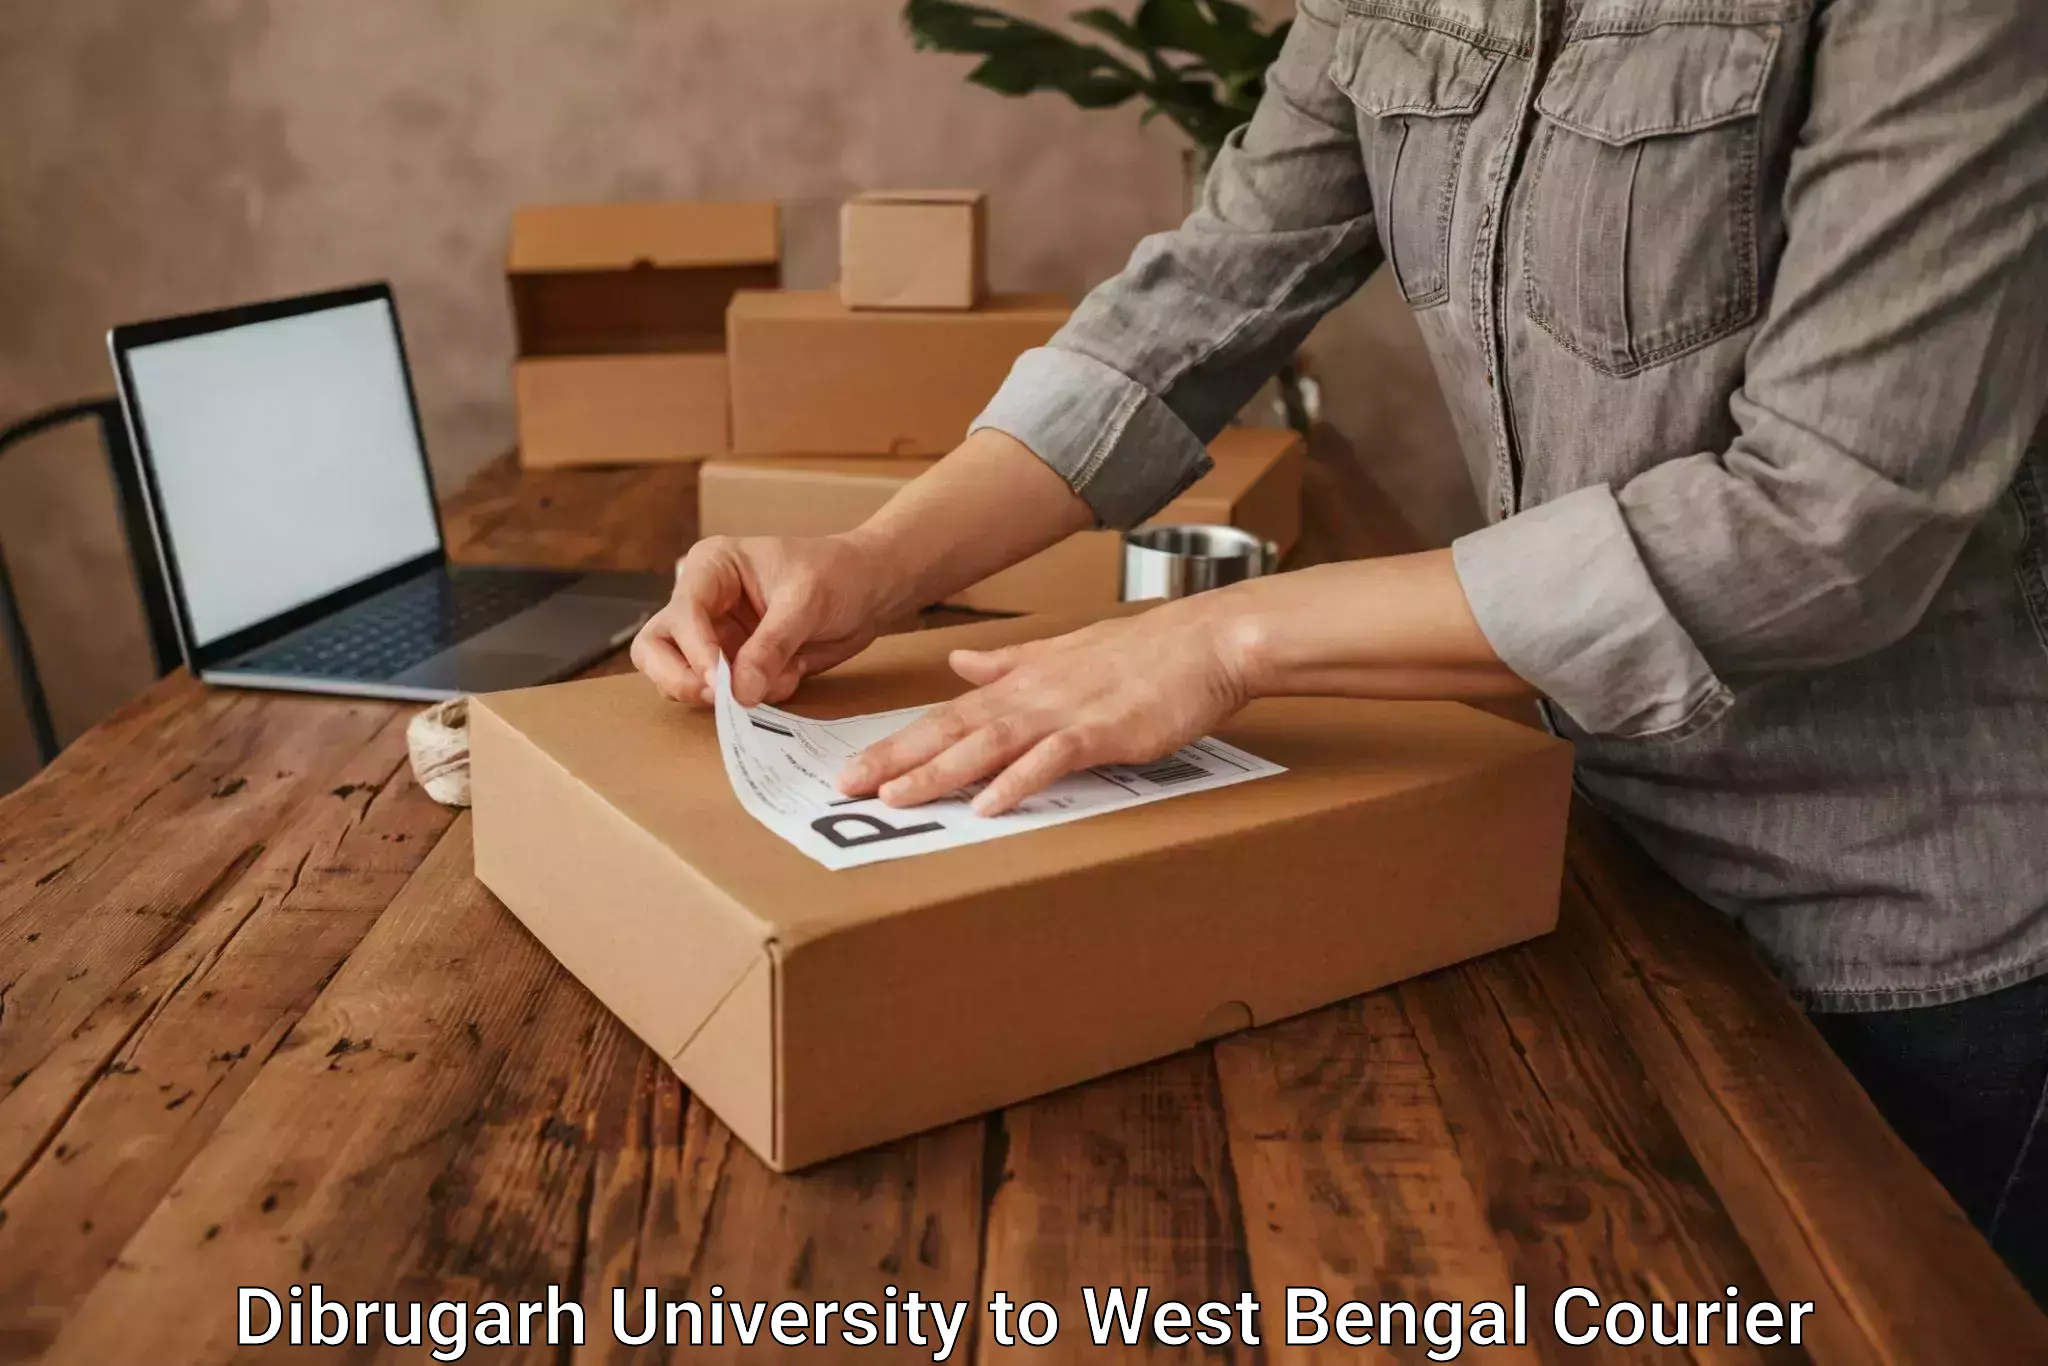 Multi-national courier services Dibrugarh University to West Bengal